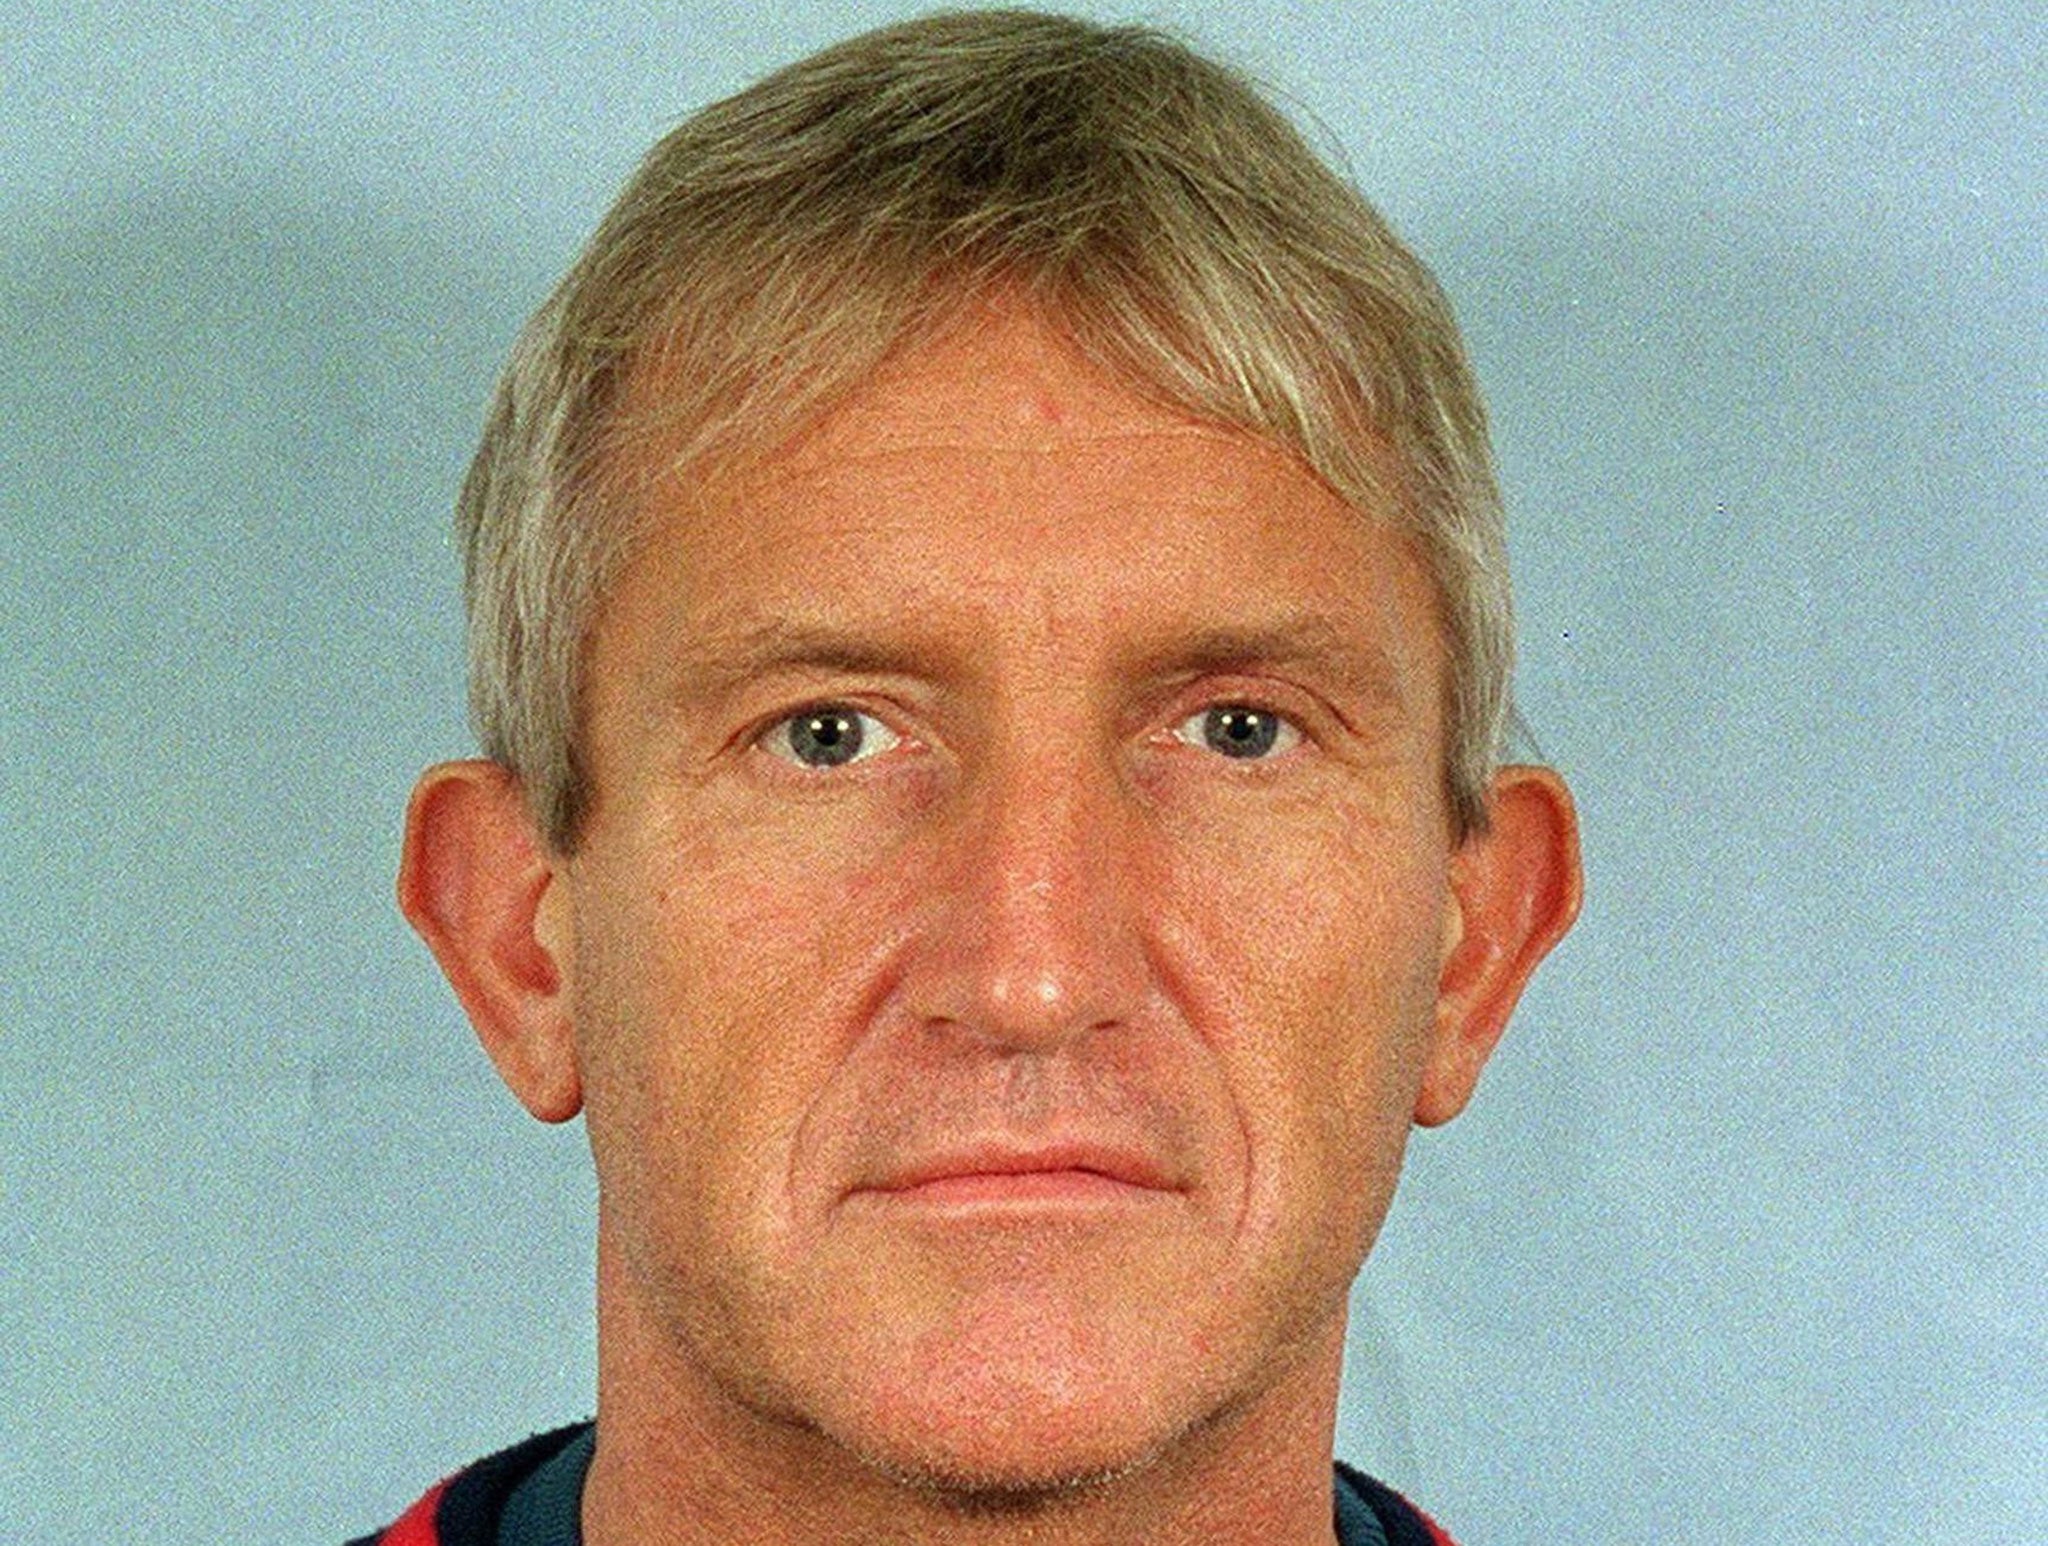 Kenneth Noye, who is now 70, pictured some time before his 1996 conviction